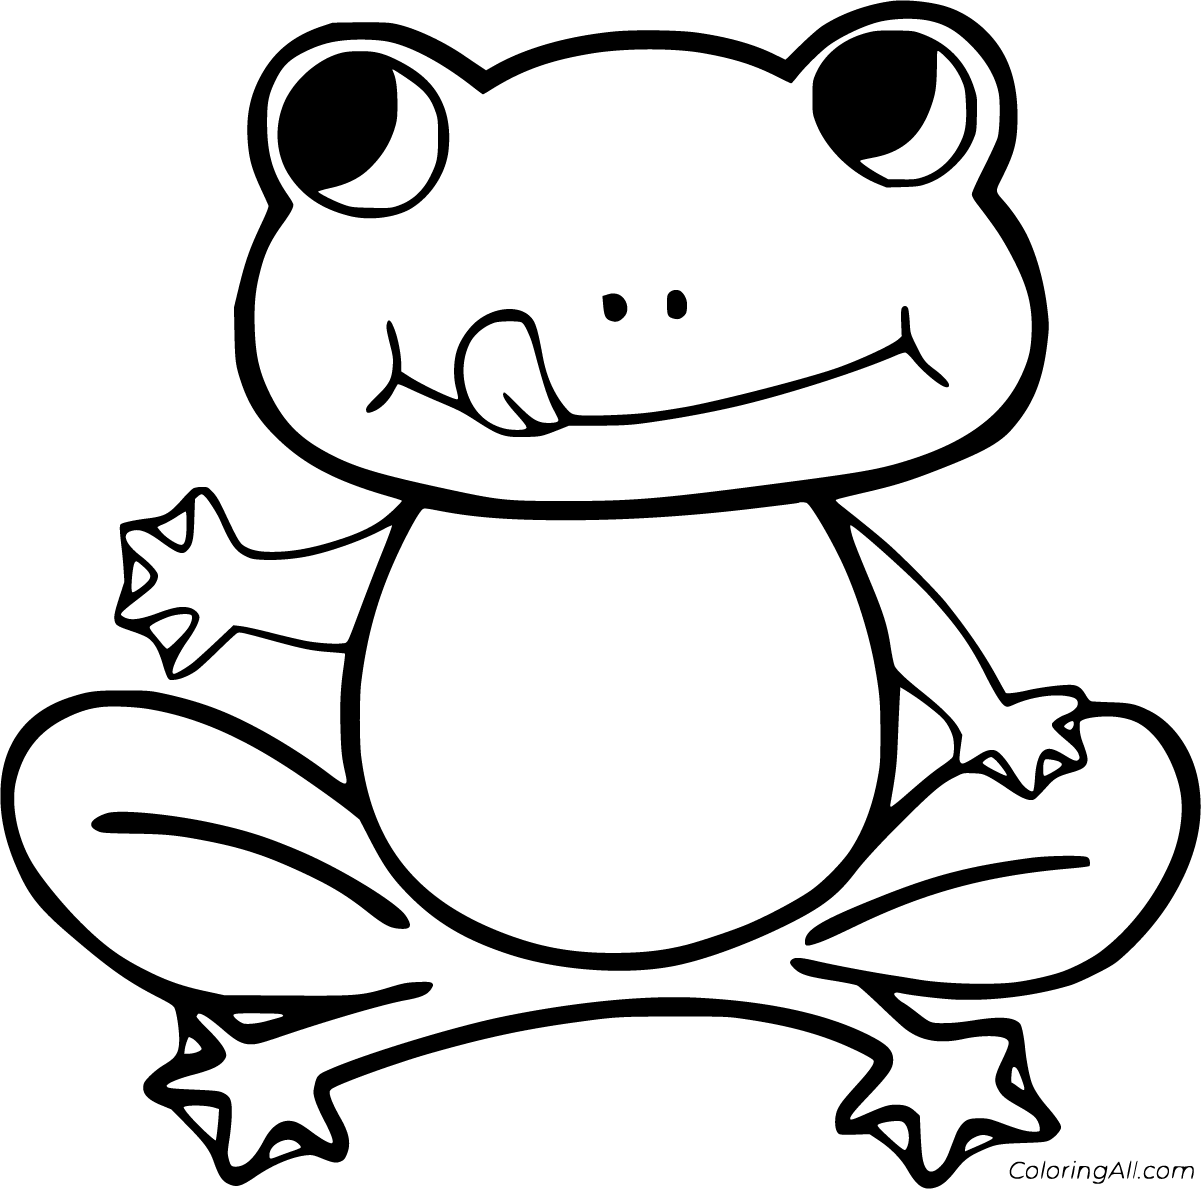 Frog Coloring Pages - ColoringAll